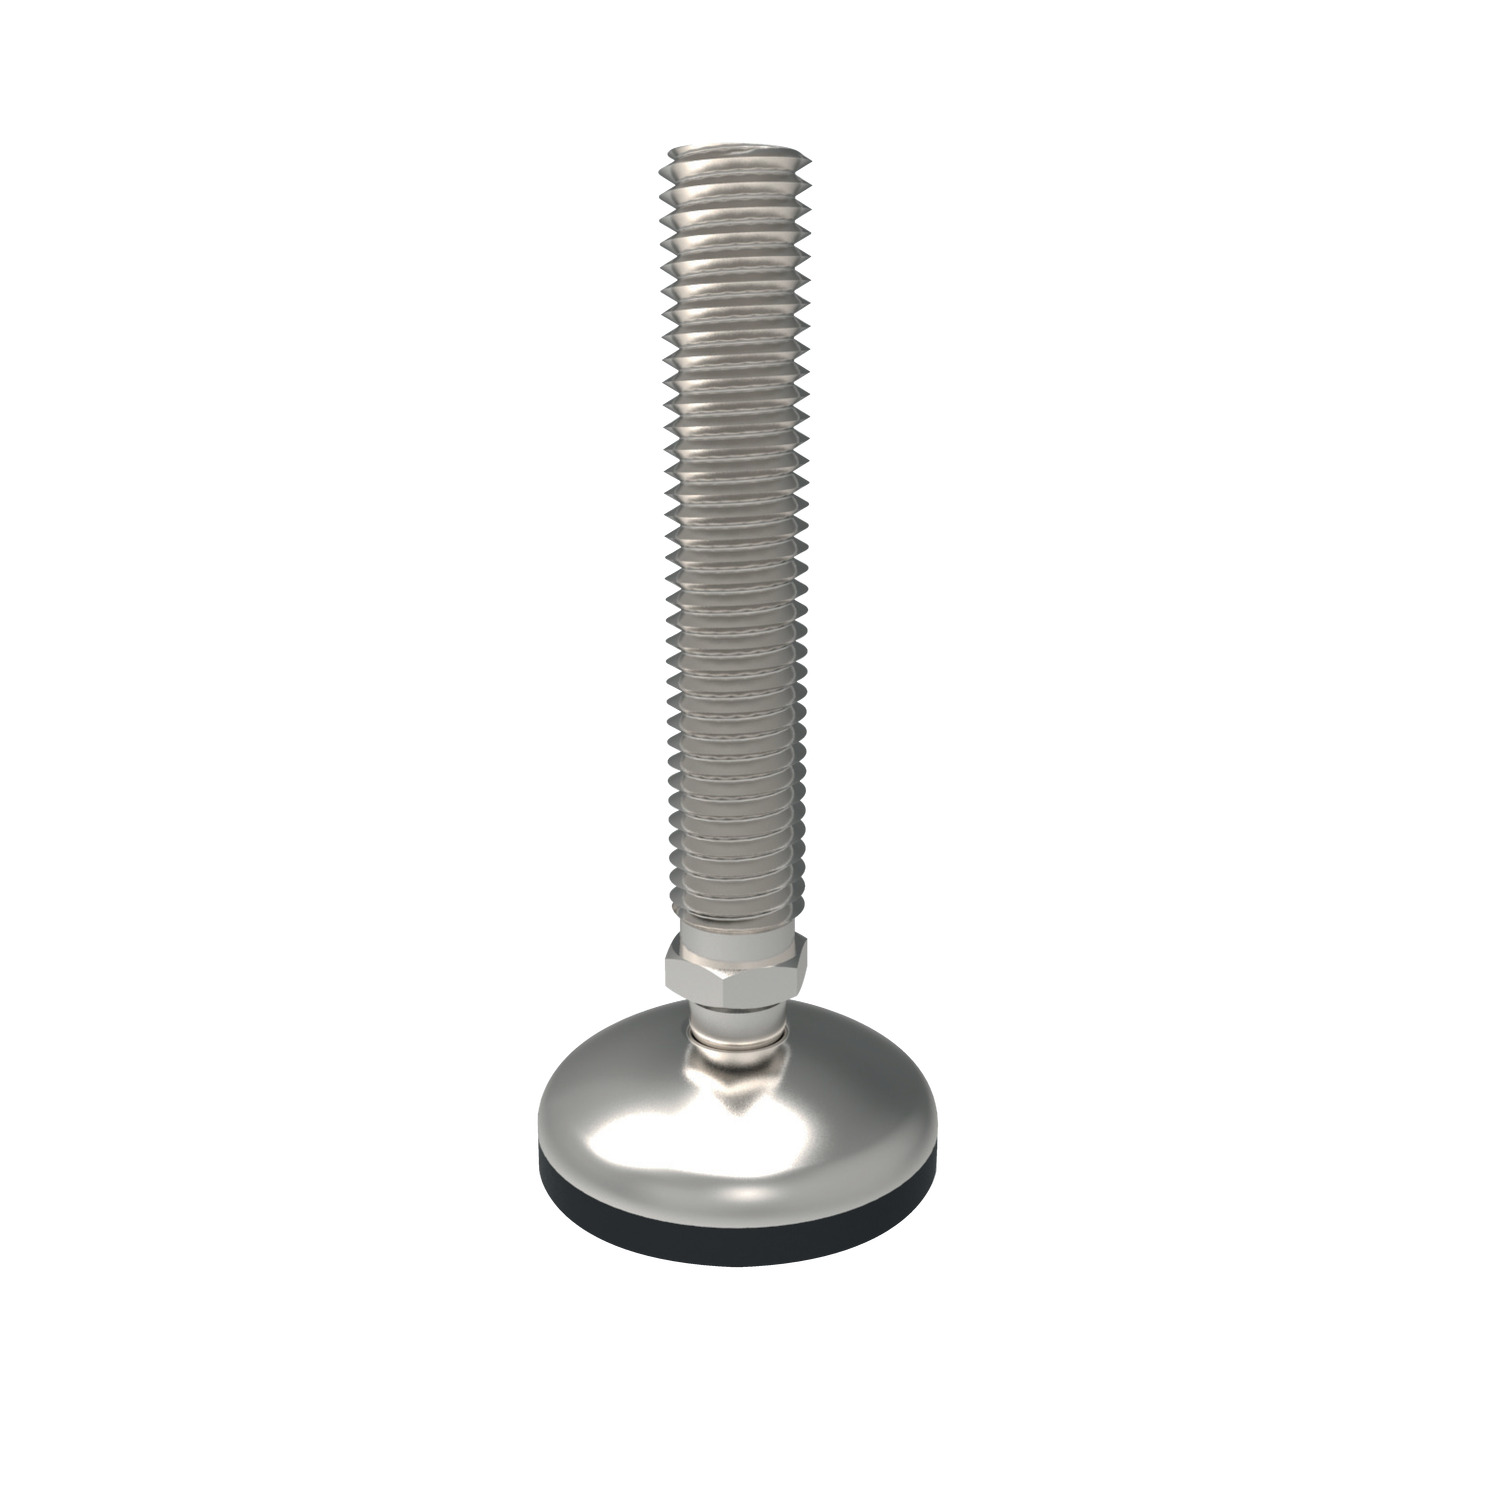 Product 34751, Machine Mount - Vibration Dampening pad and bolt - stainless steel / 